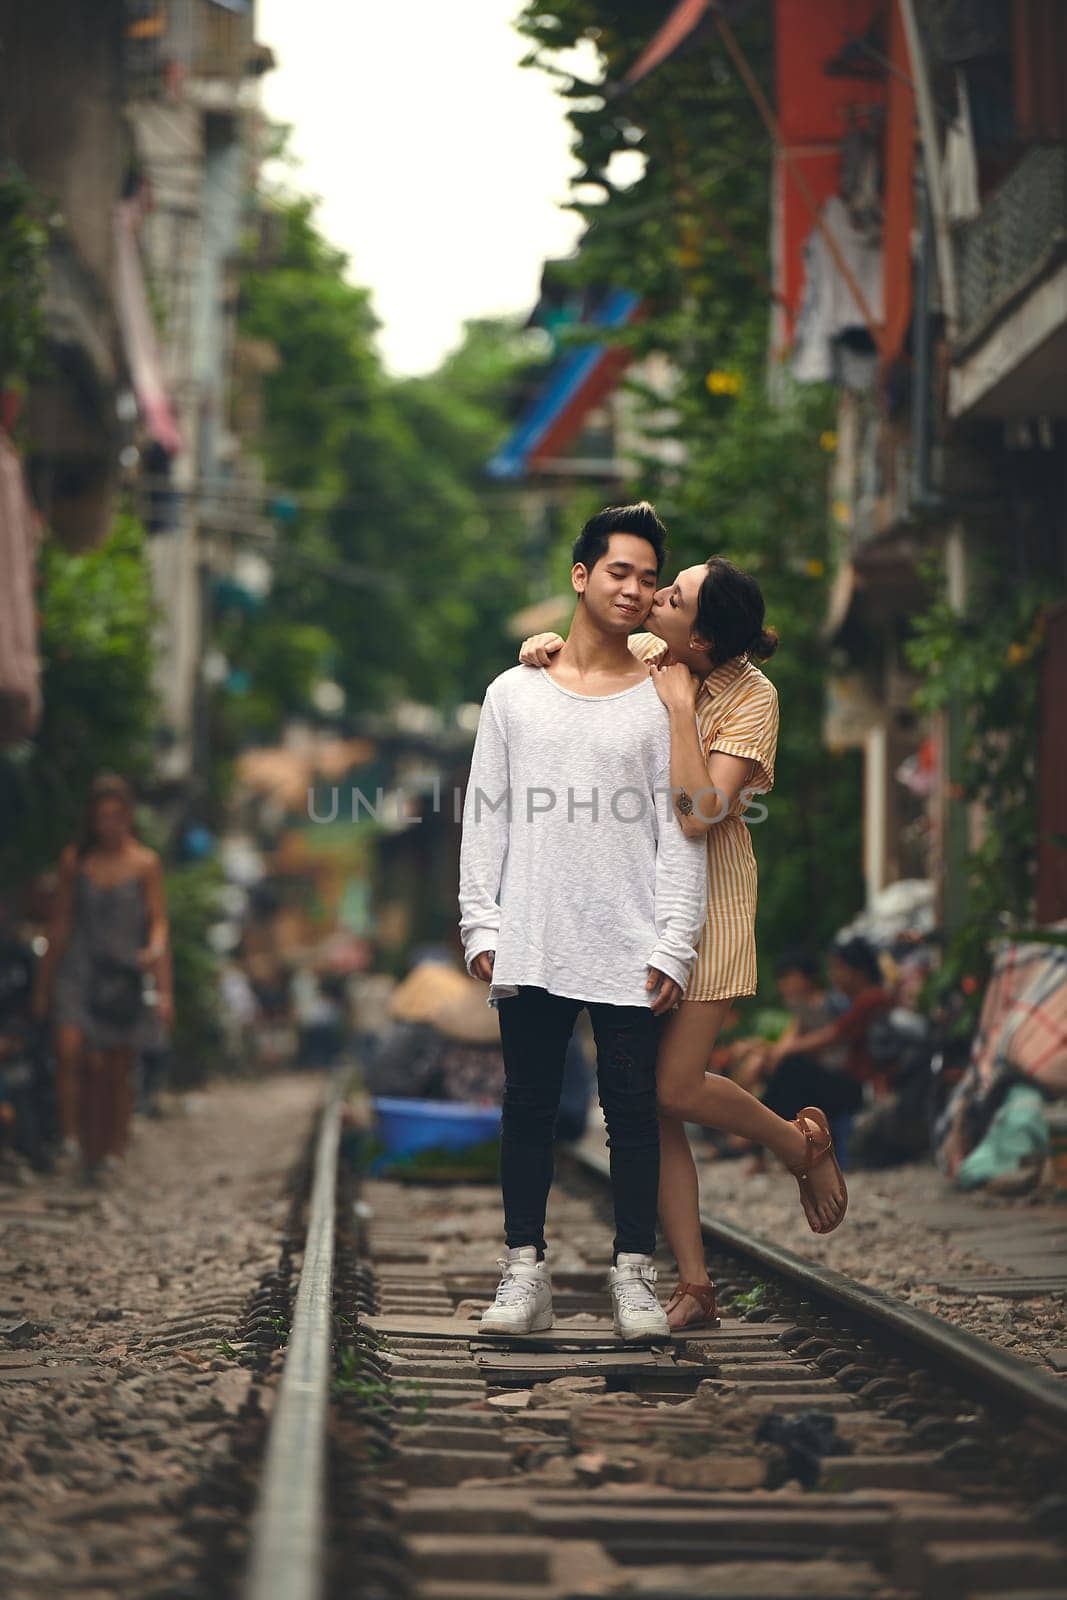 Her kisses make my heart smile. a young couple sharing a romantic moment on the train tracks in the streets of Vietnam